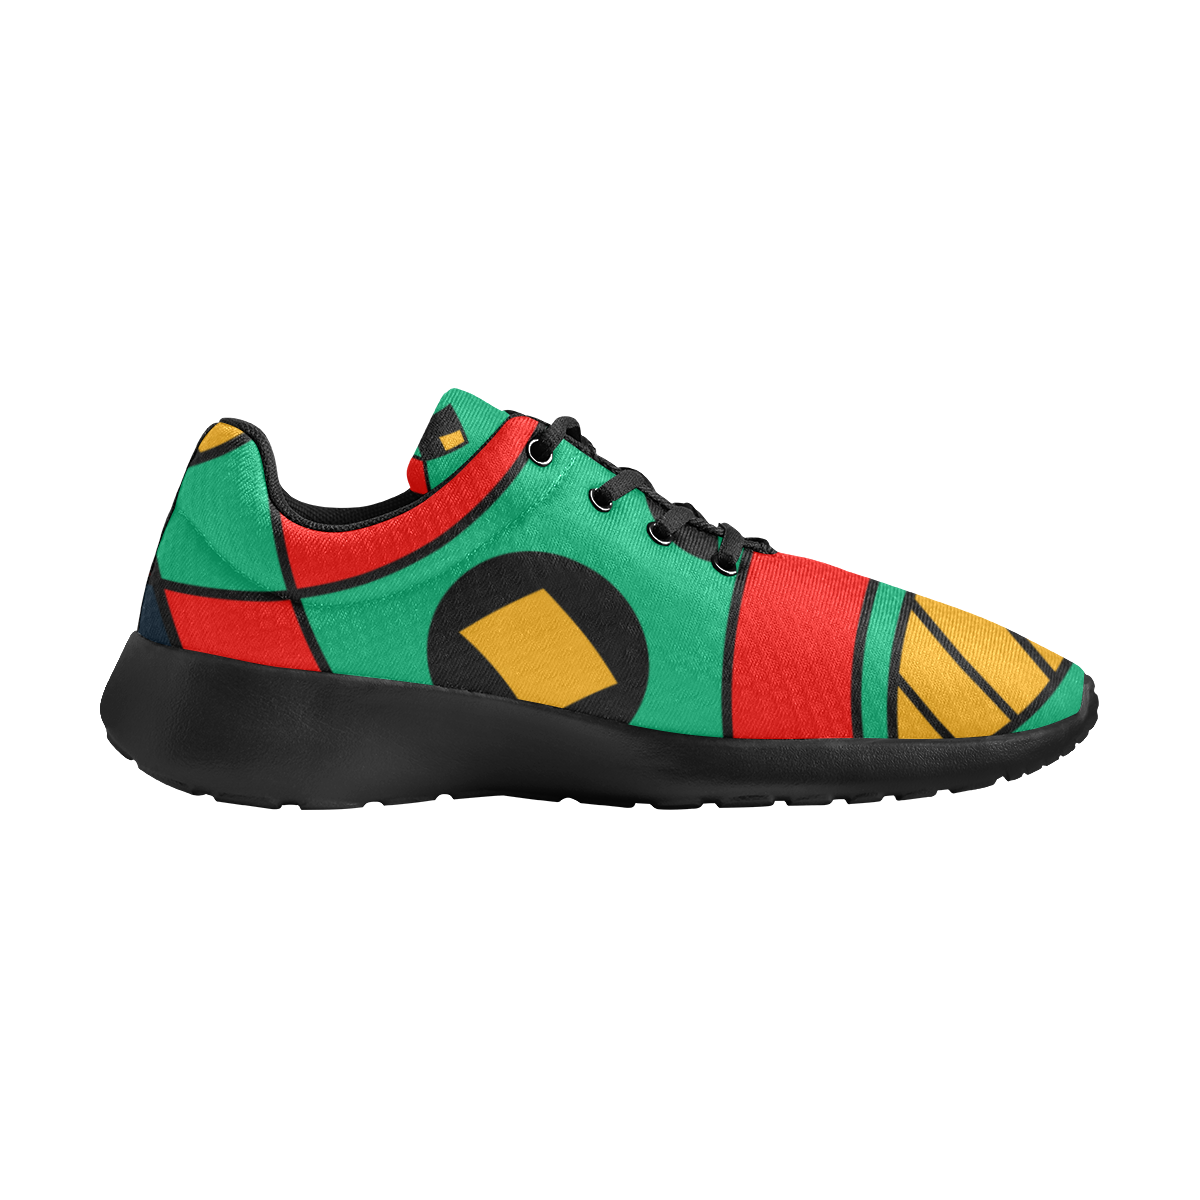 African Scary Tribal Women's Athletic Shoes (Model 0200)